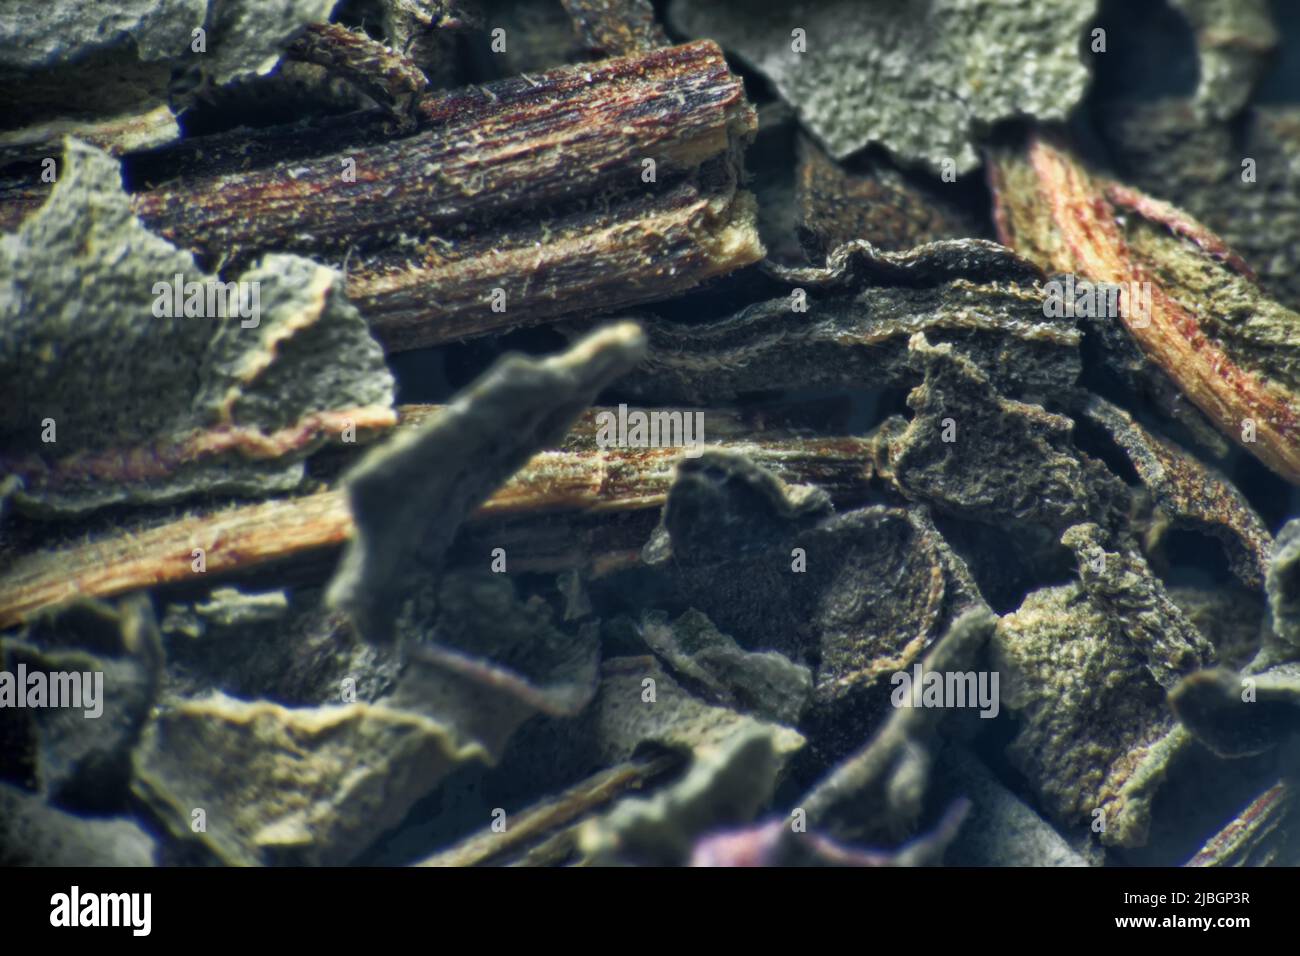 Herb repertory (dry vulnerary plants), officinal mixture for herbal tea. Orthosiphonis staminei folia (extreme close up). Means of folk medicine, phar Stock Photo